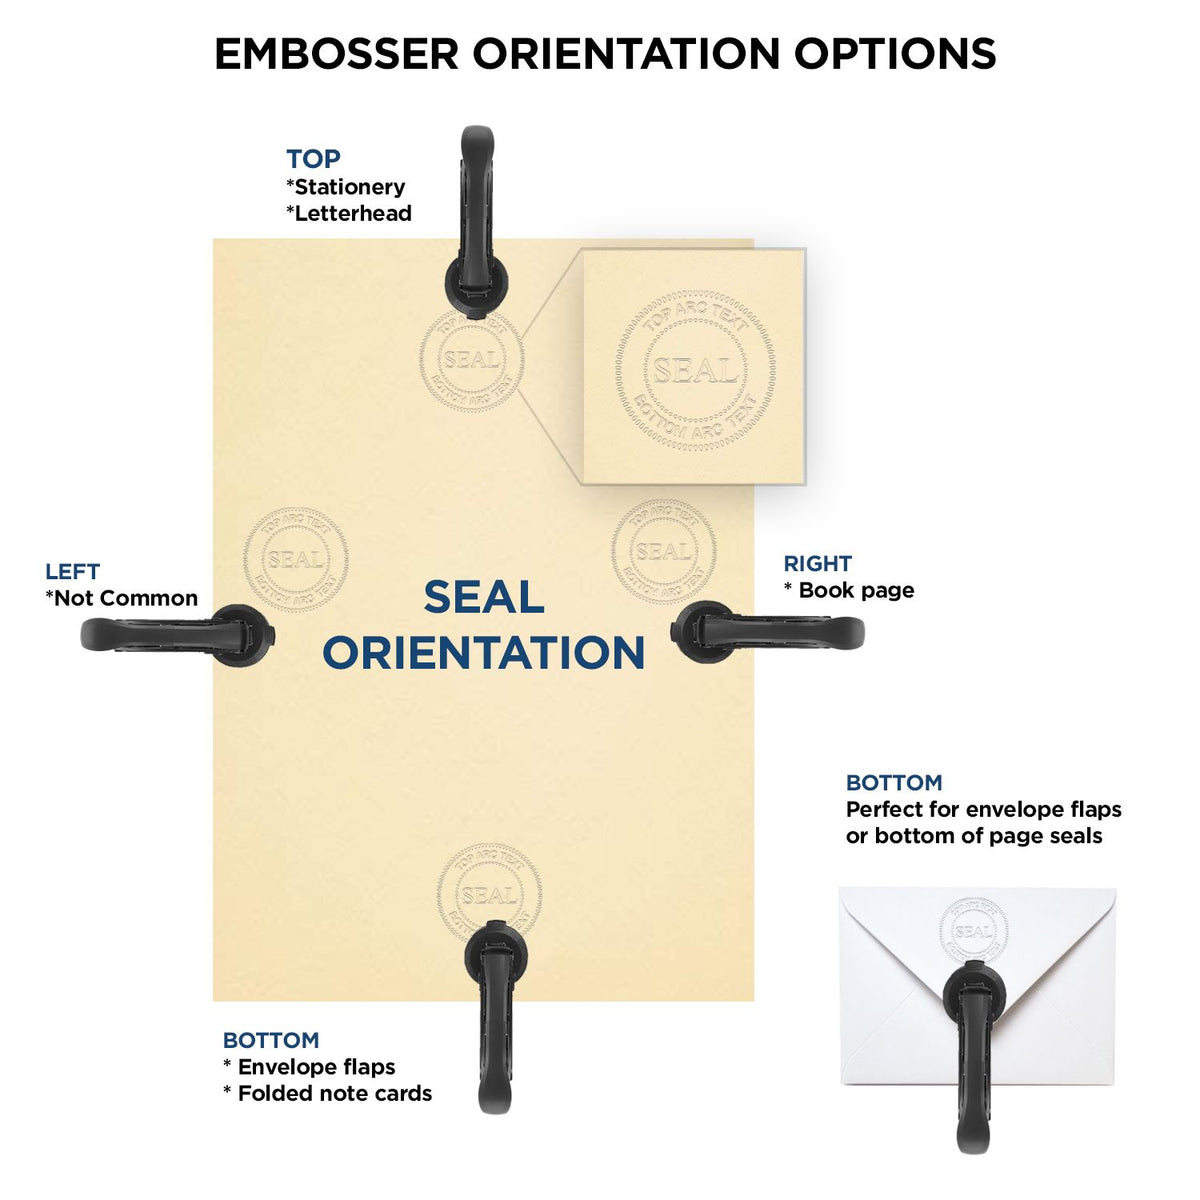 An infographic for the Heavy Duty Cast Iron Texas Architect Embosser showing embosser orientation, this is showing examples of a top, bottom, right and left insert.